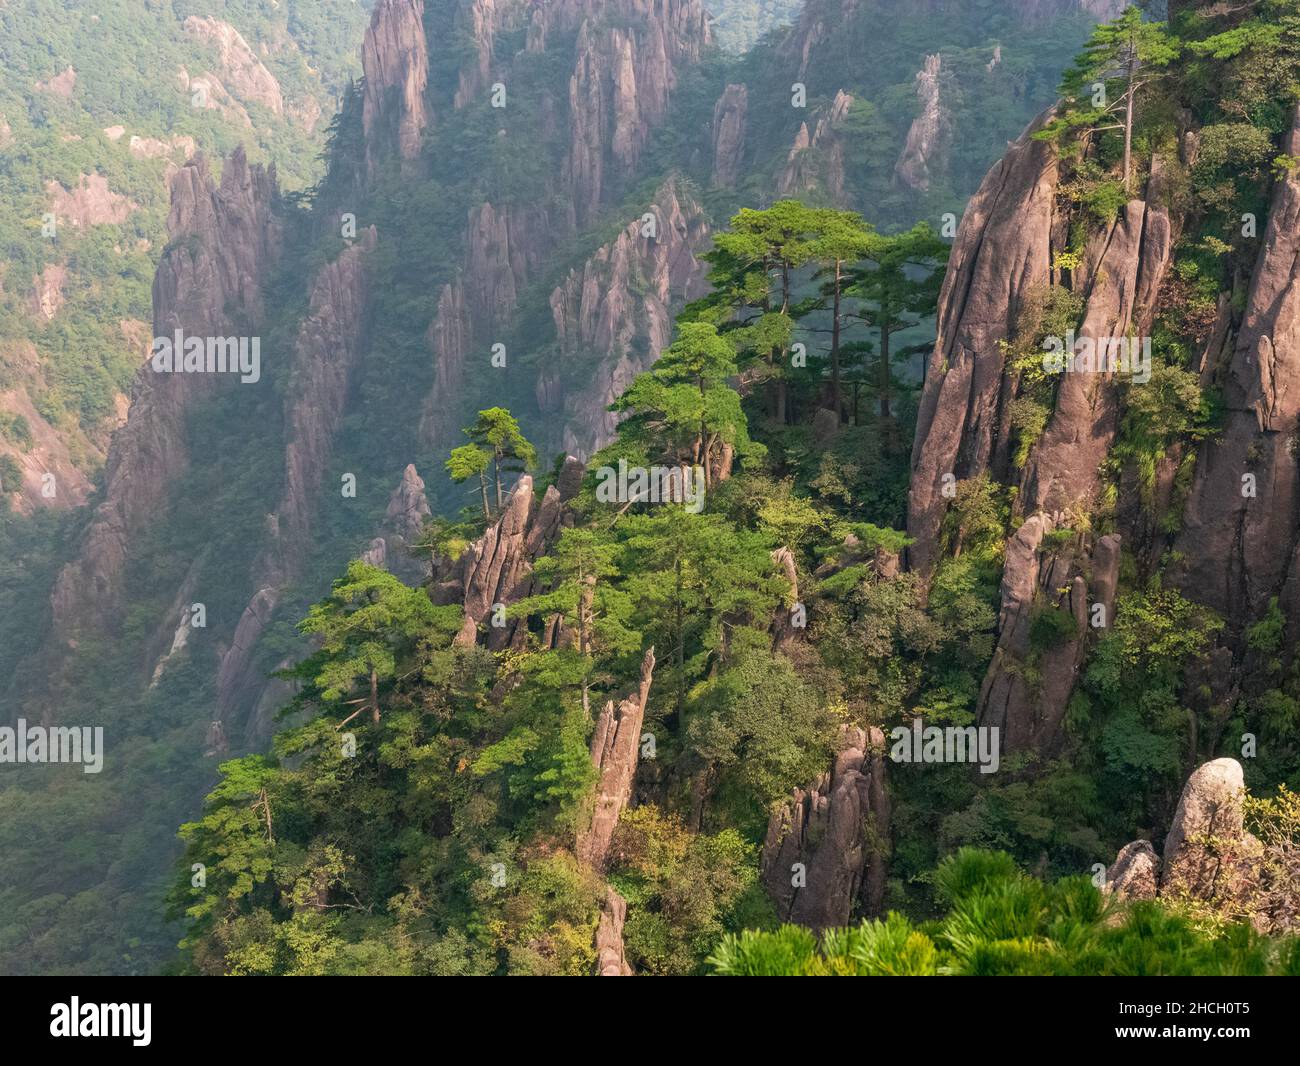 A valley at the Huangshan mountains, Yellow mountains, Anhui, Huangshan, China, Asia, Stock photo Stock Photo